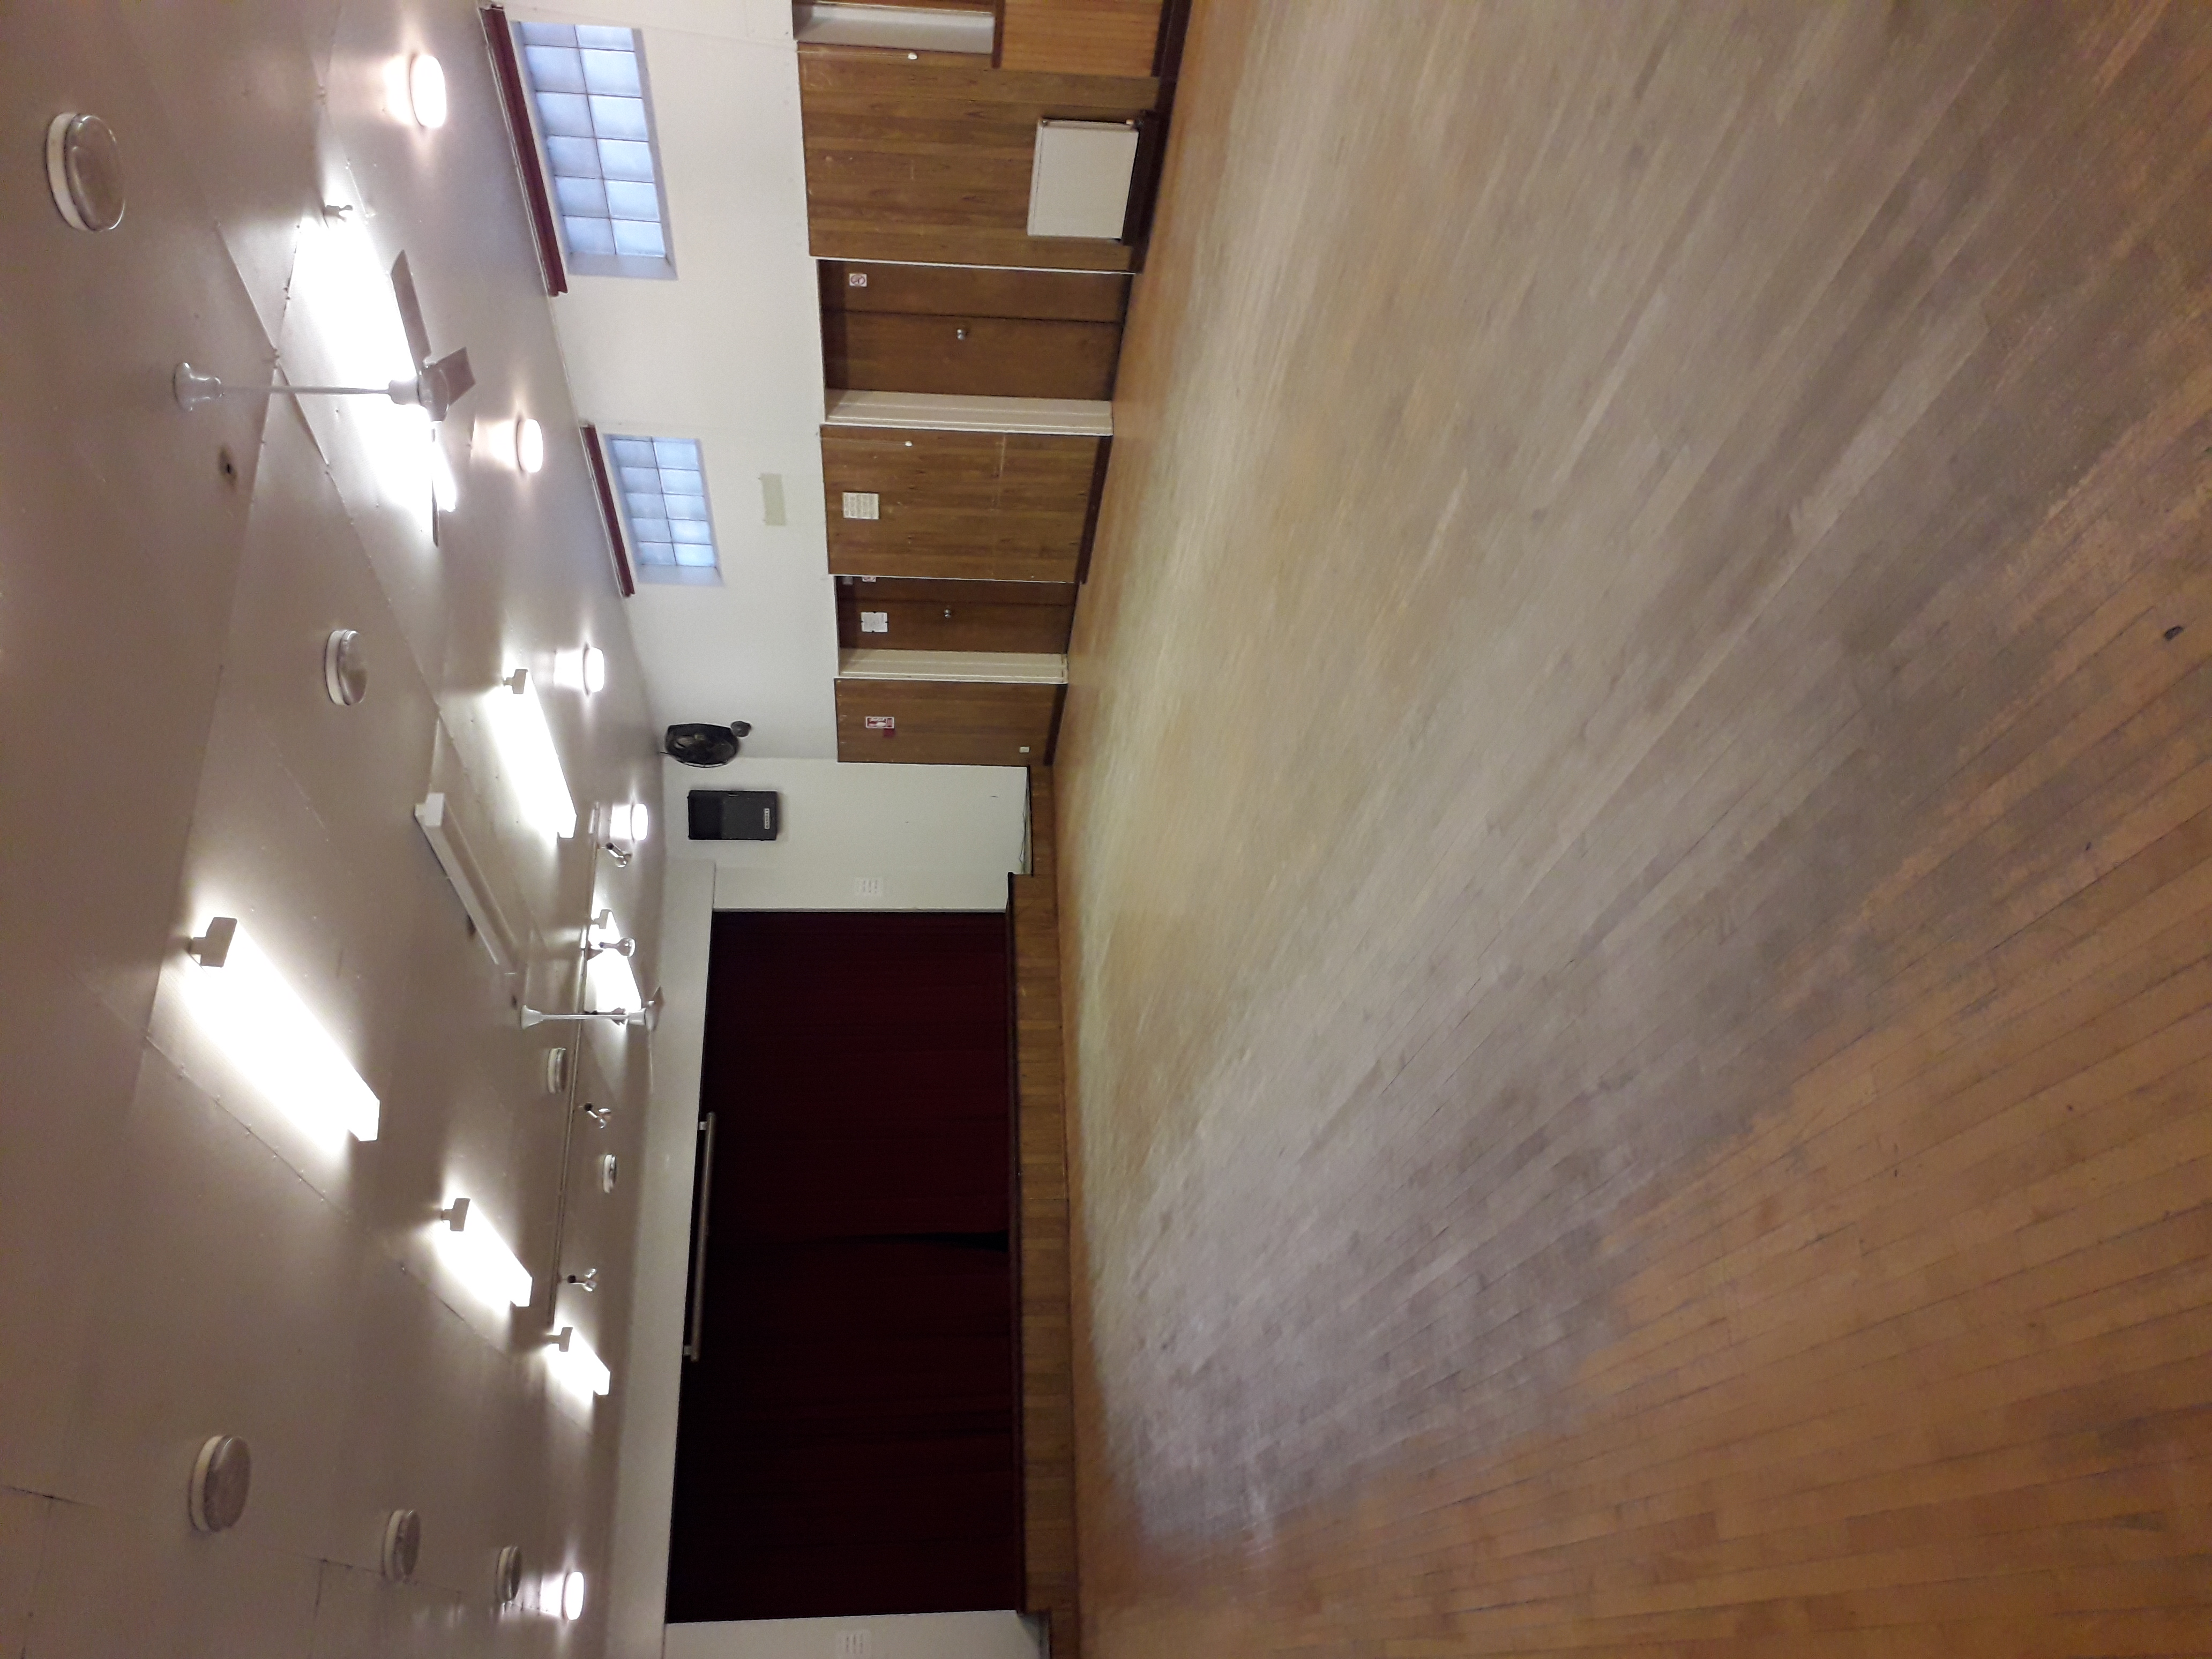 Image of the main hall within the village hall